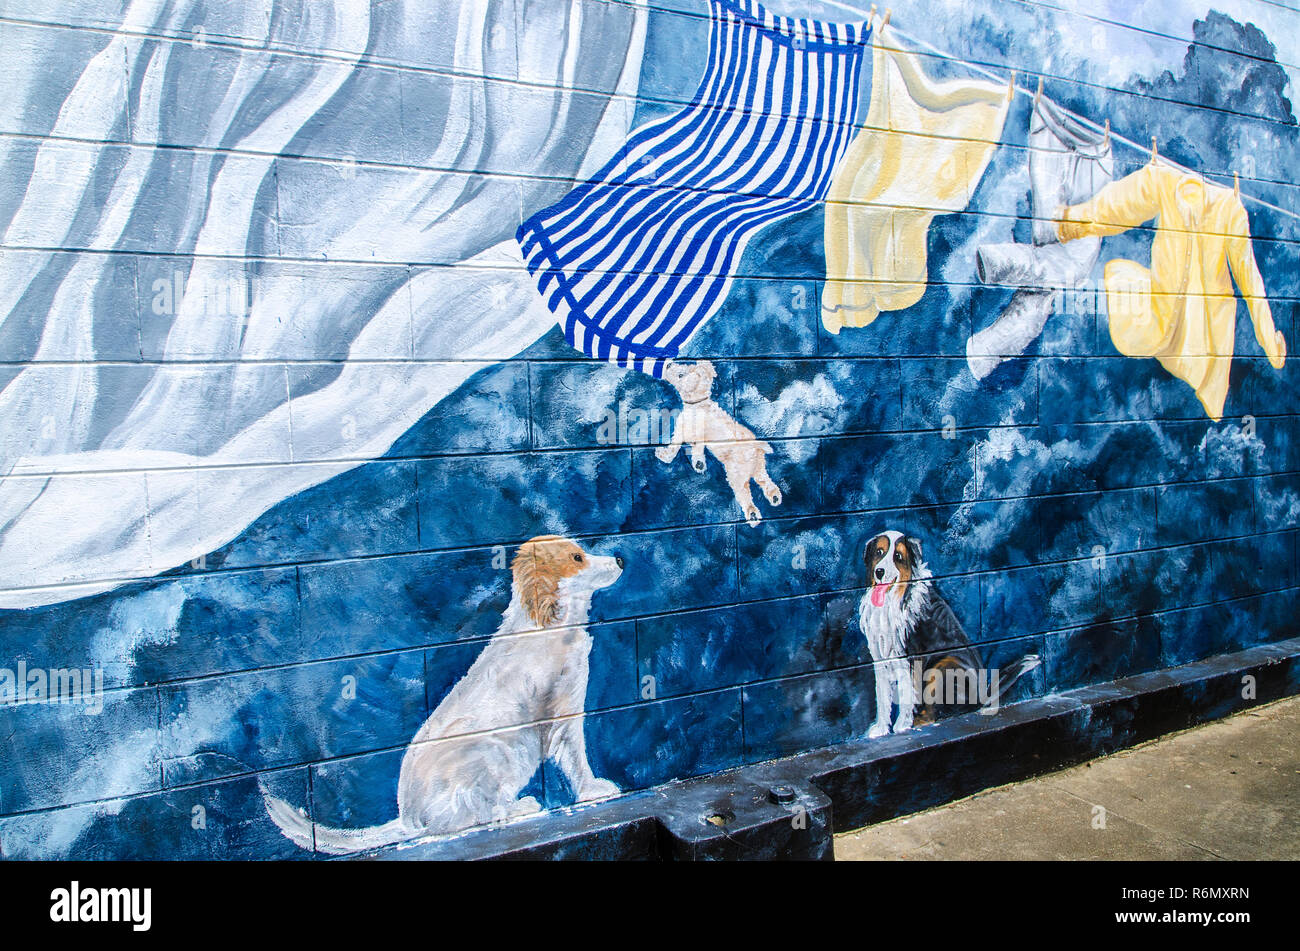 Three dogs play with laundry hanging from a clothesline in this wall mural  on the side of a dry cleaners shop in downtown West Point, Mississippi  Stock Photo - Alamy